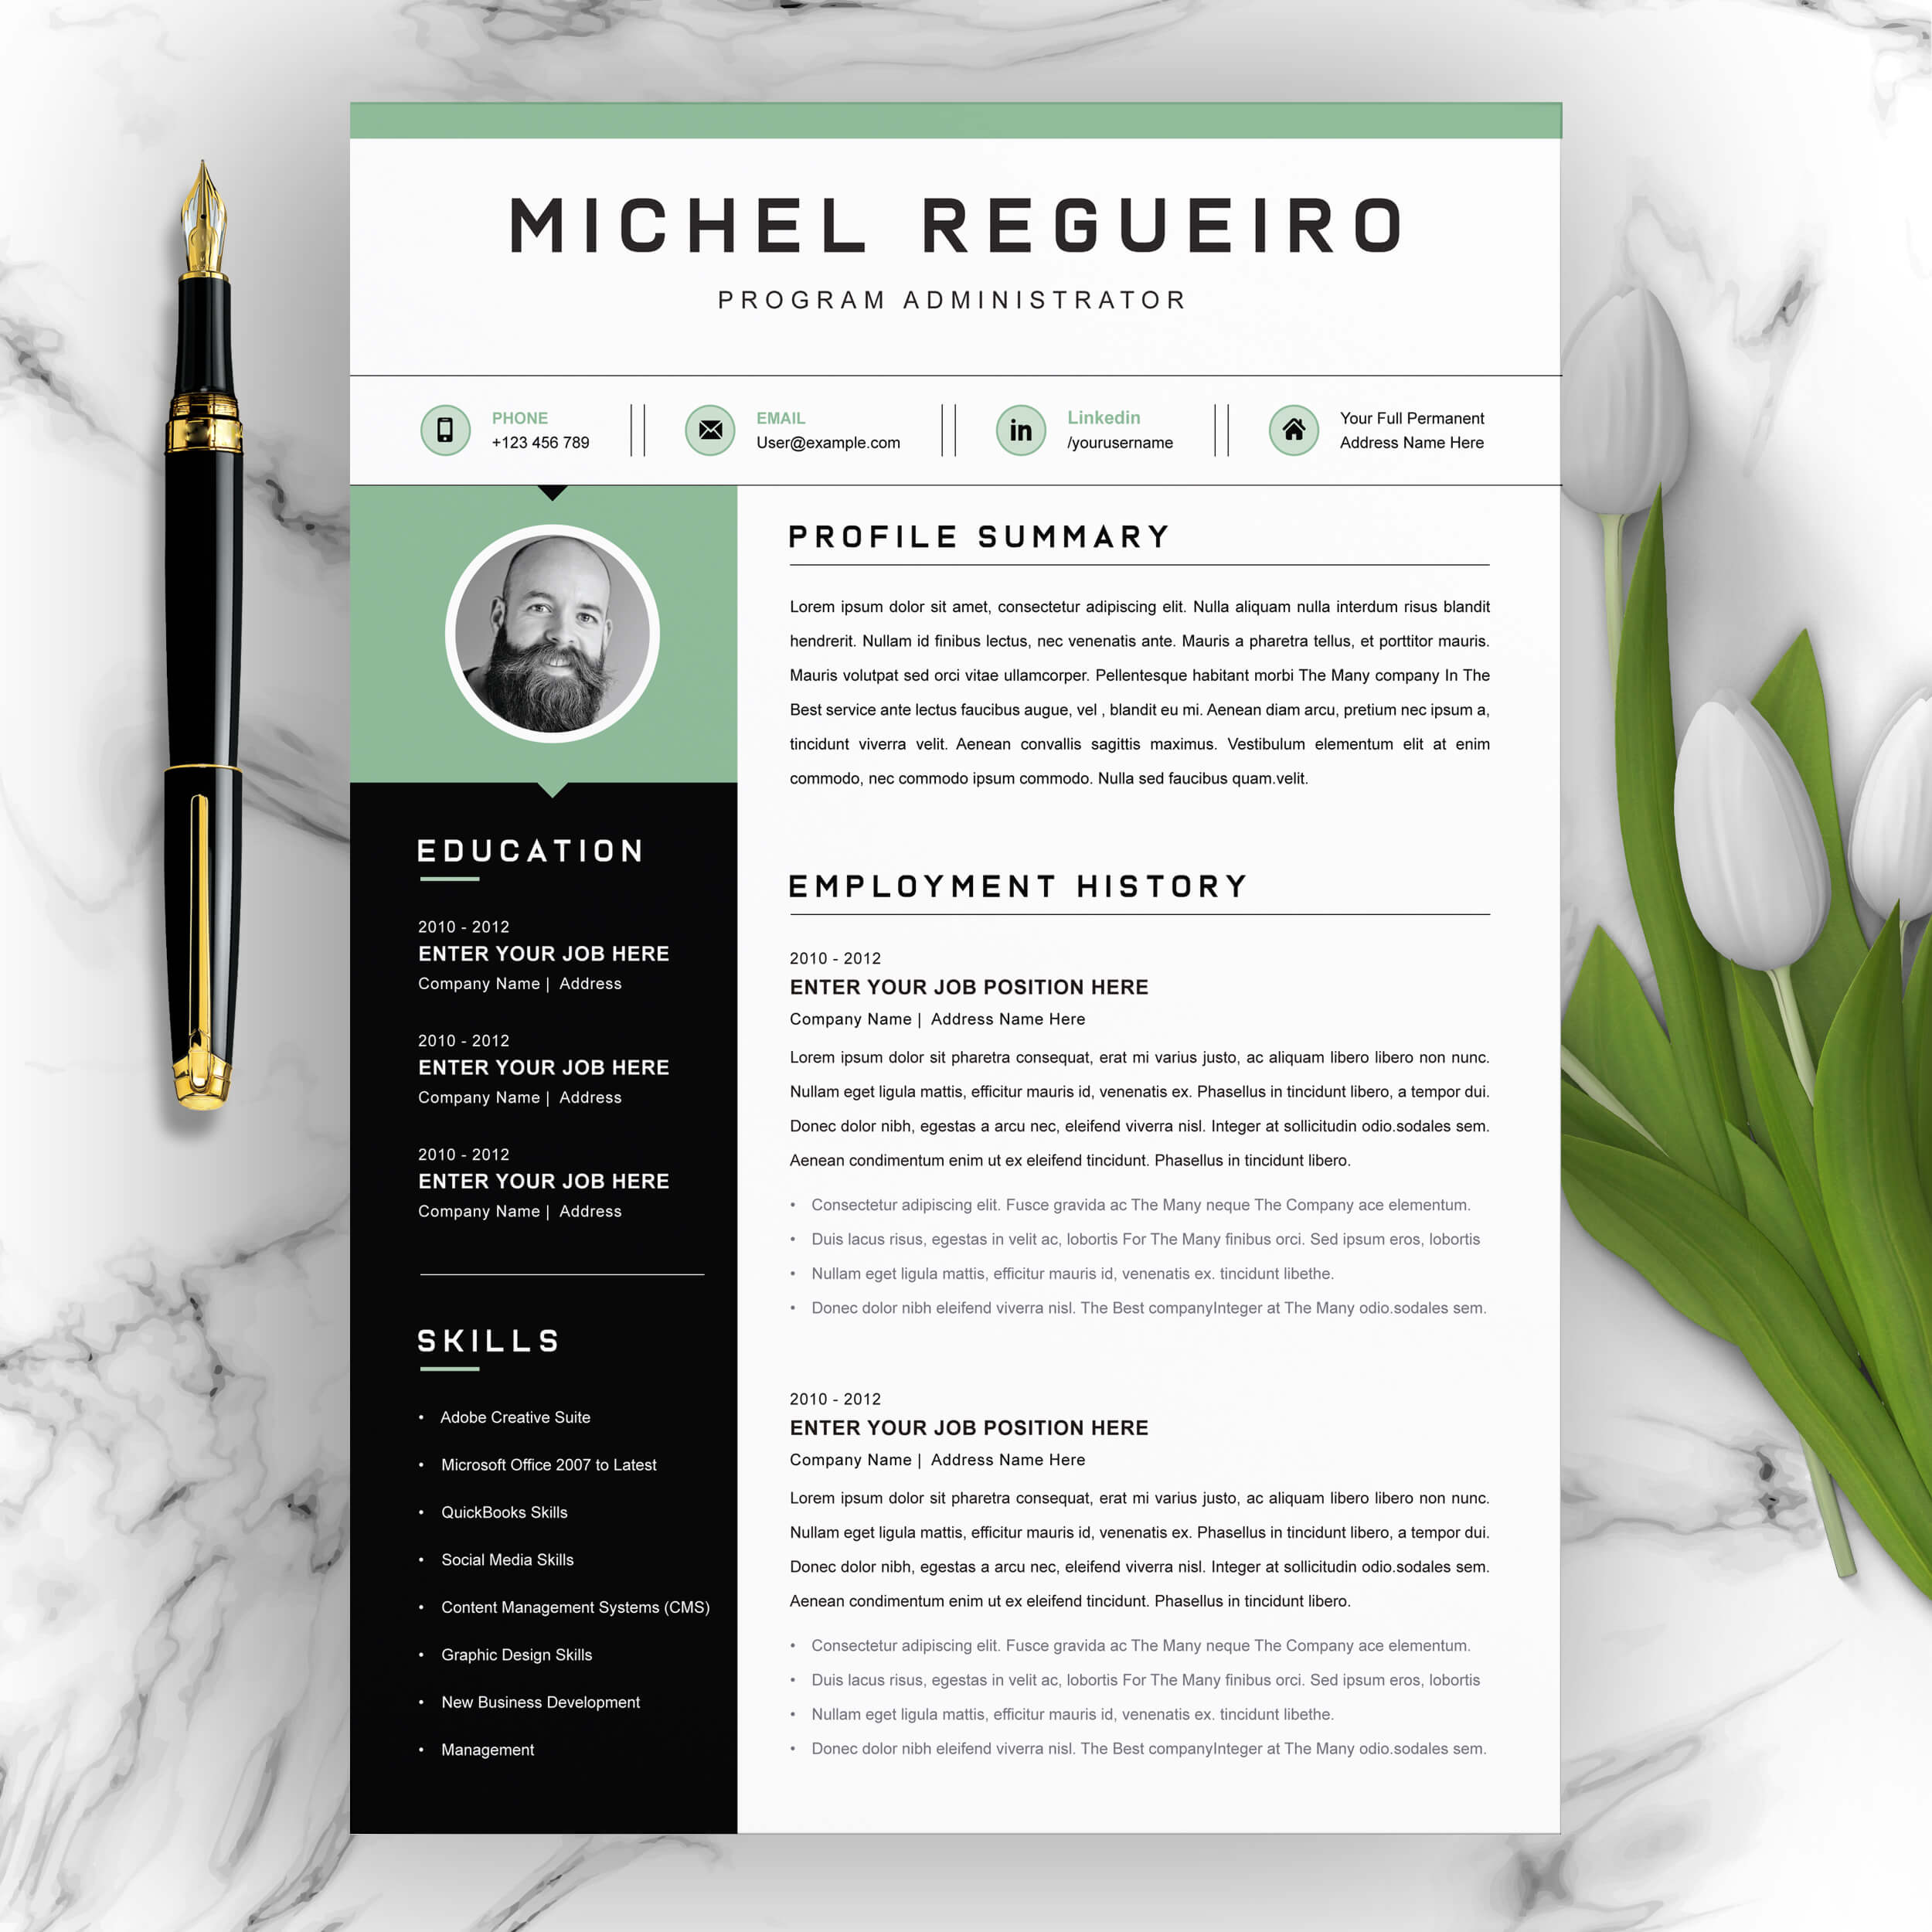 Sleek and Professional Resume Template for Career Advancement in Business, Finance, and Management Fields cover image.